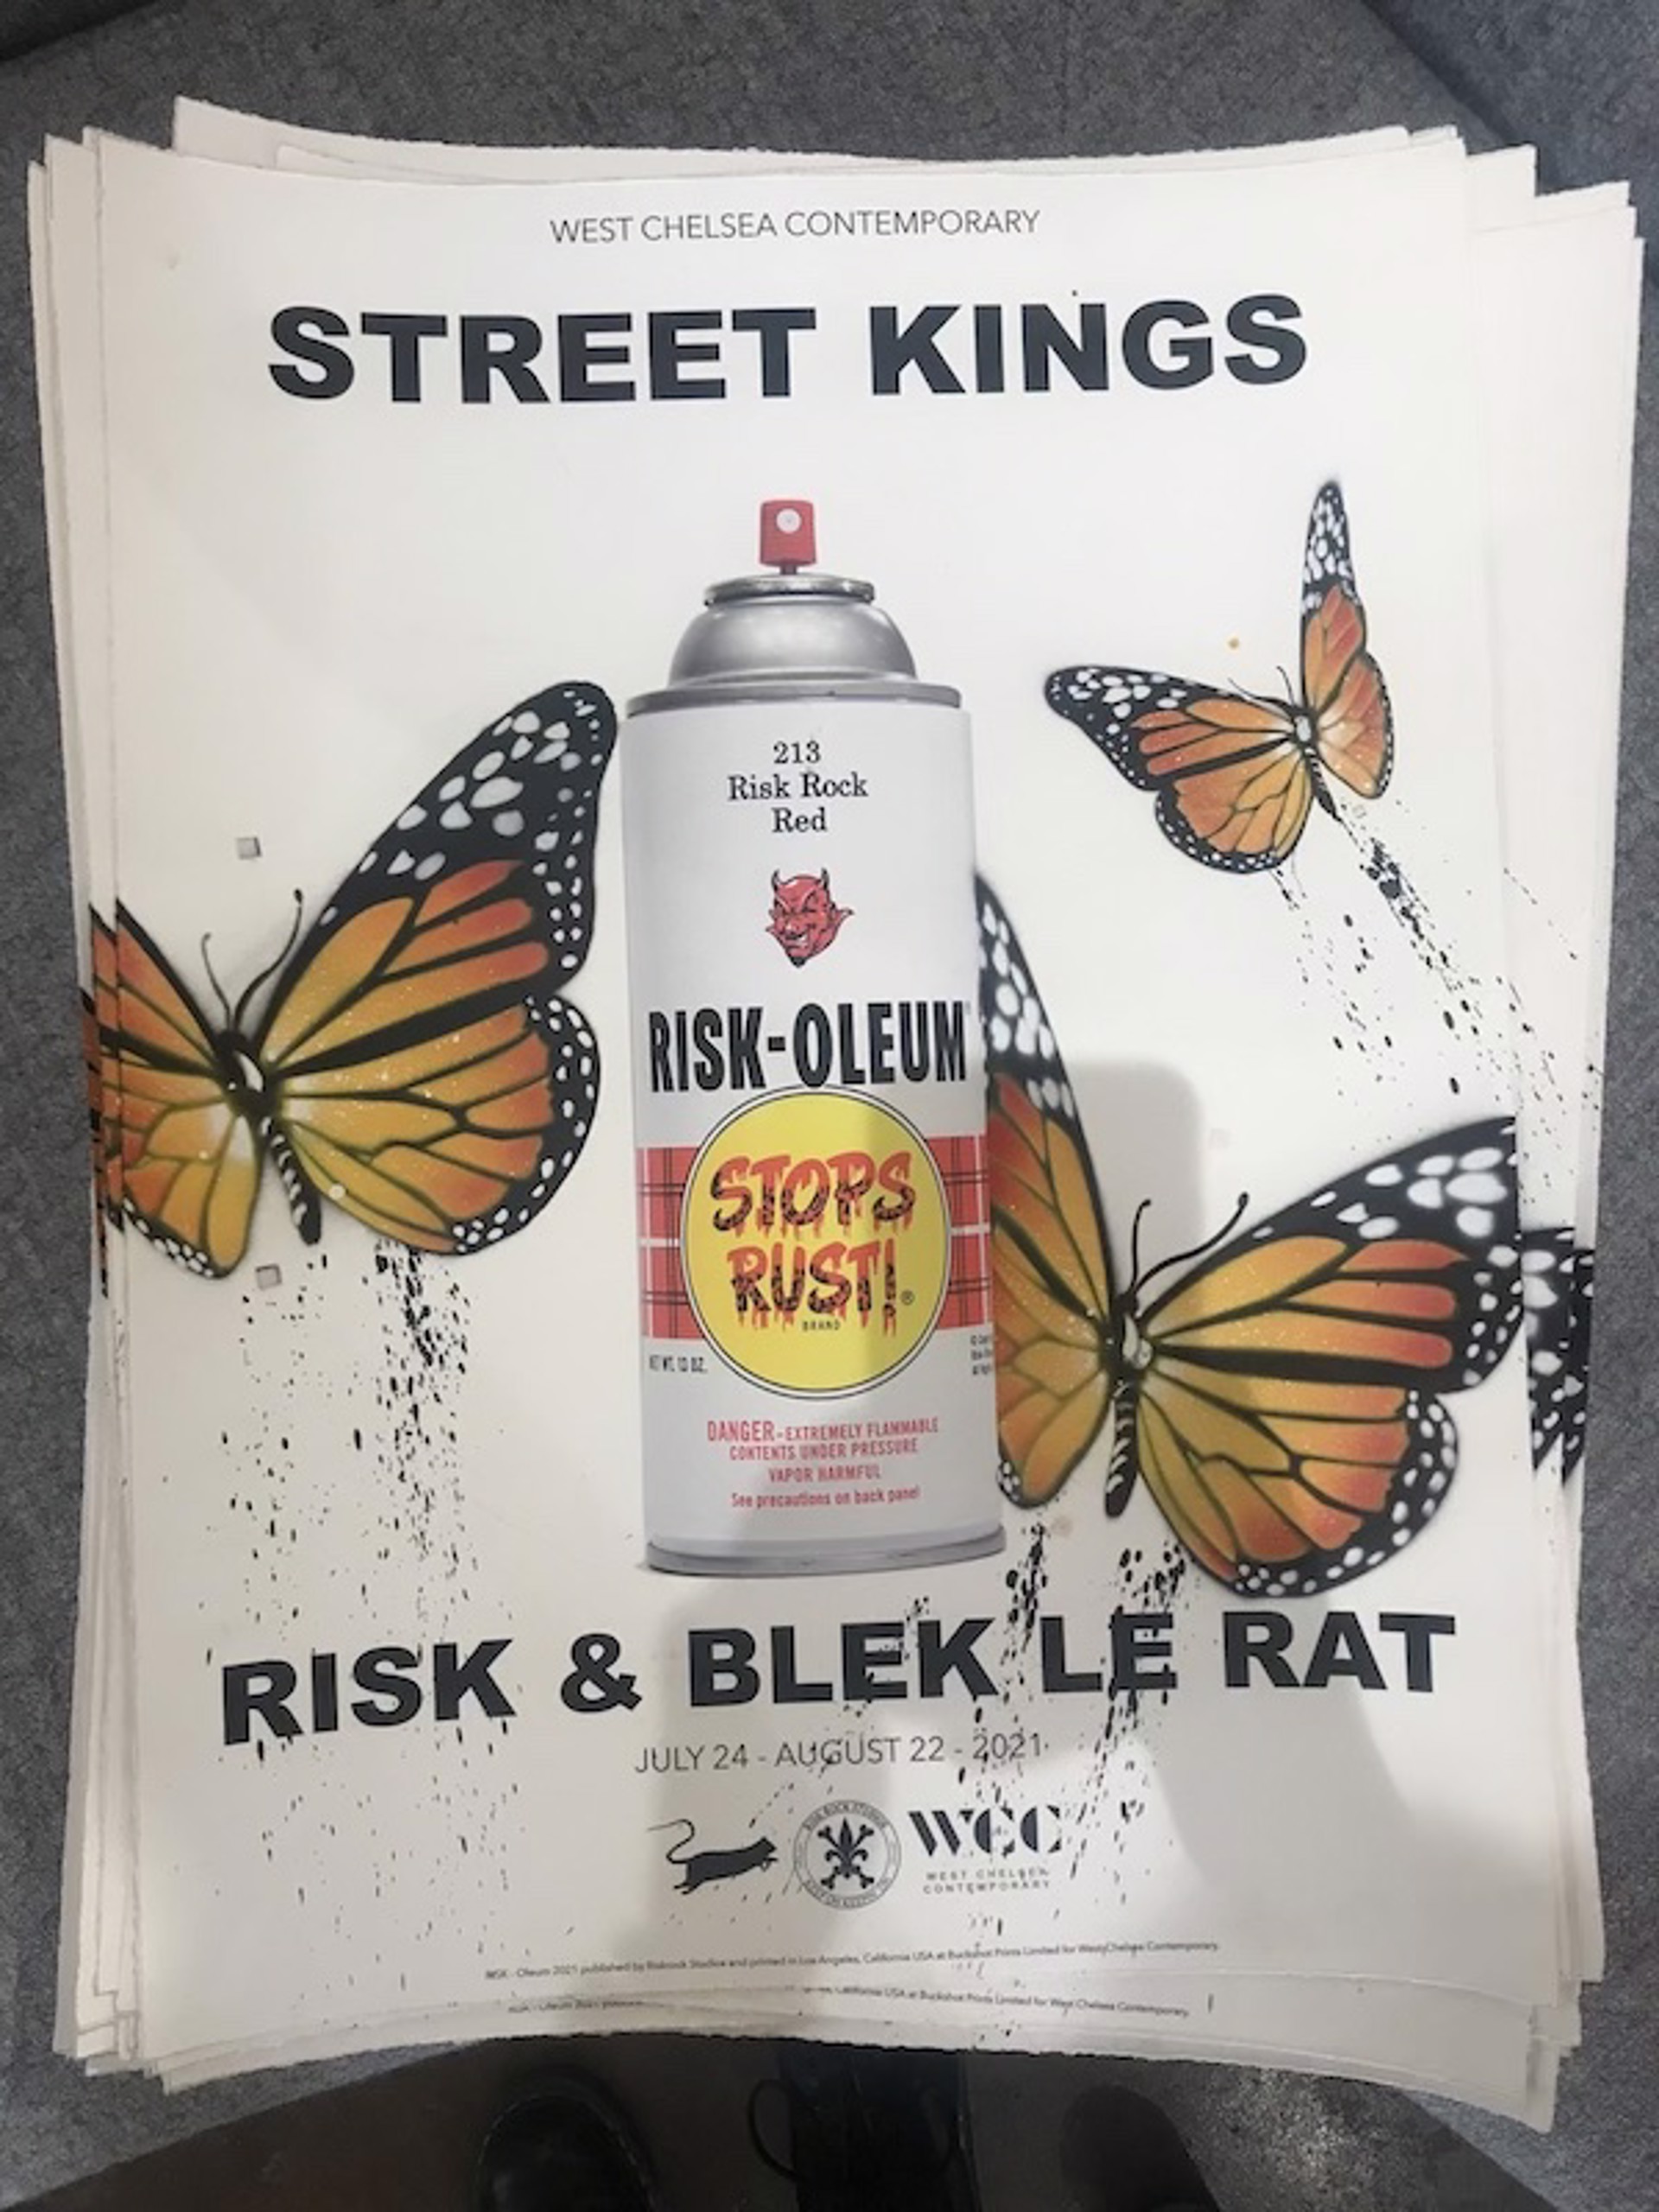 Street Kings Show Print (20/50) by Risk